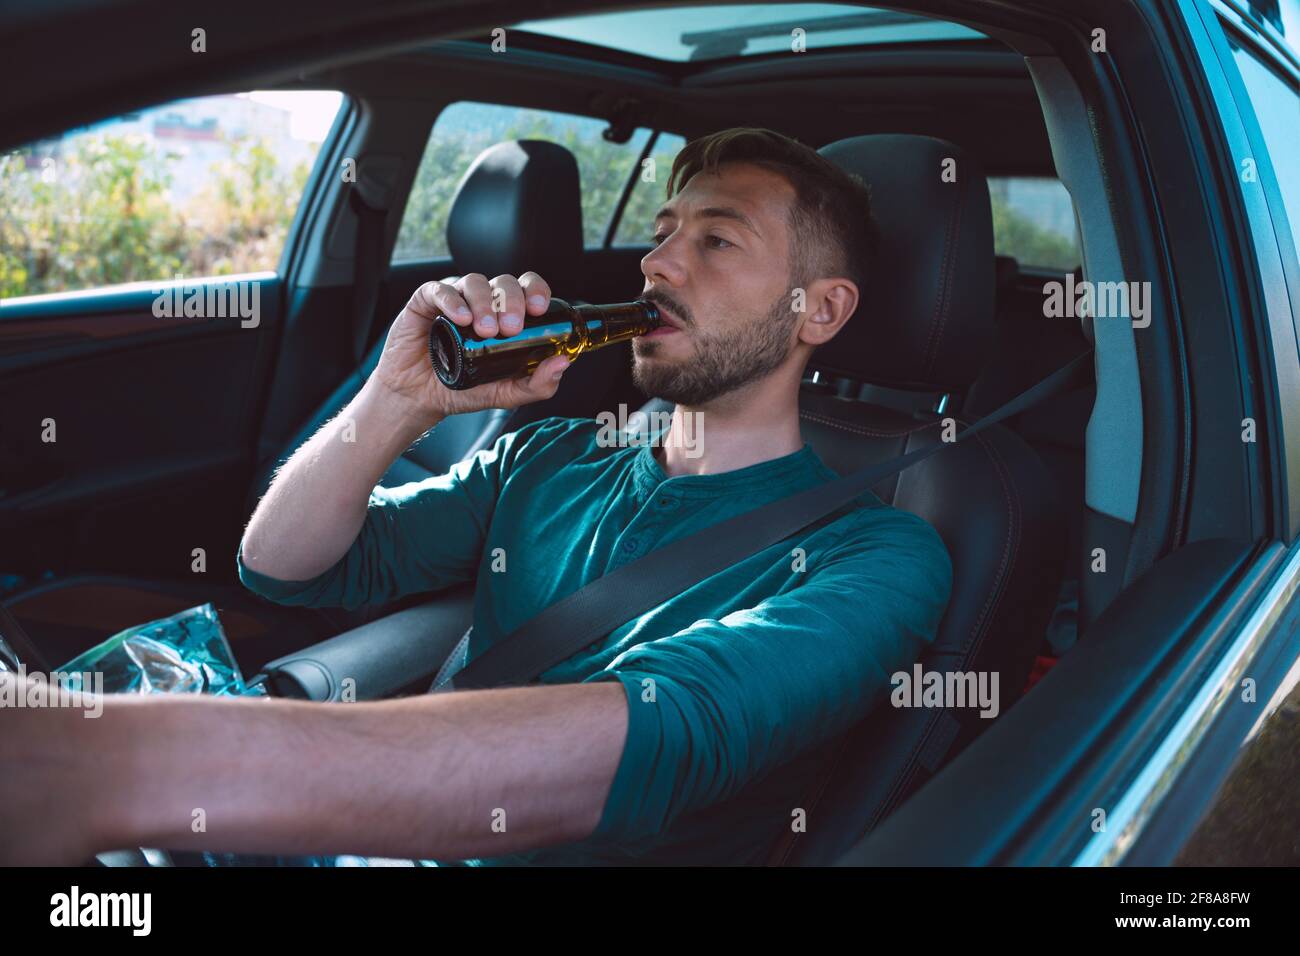 Drunk Driver Young Man Drinking Beer While Driving A Car Driver Under Alcohol Influence